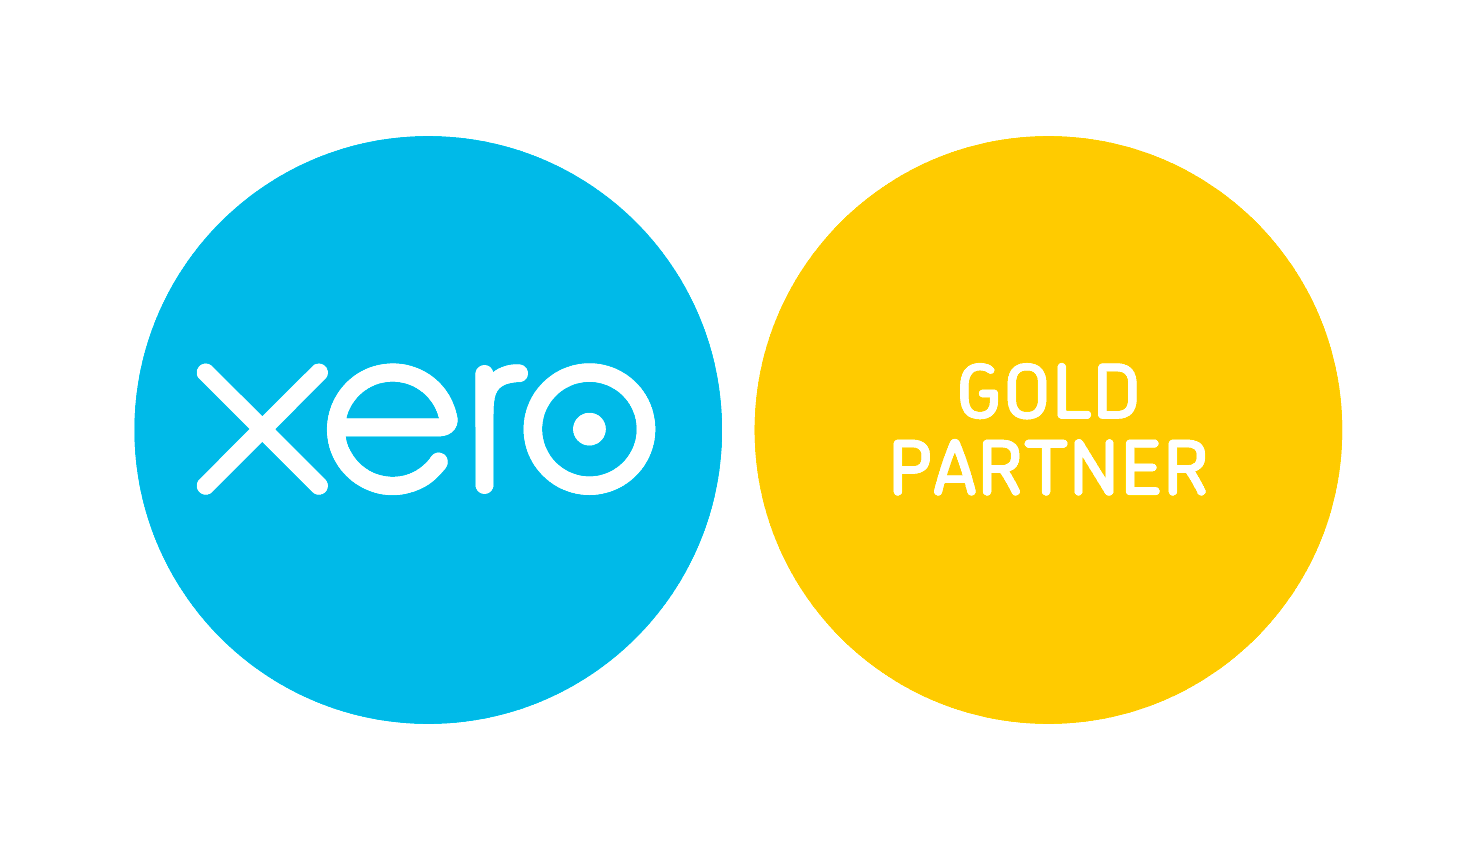 Xero Gold Partner approved